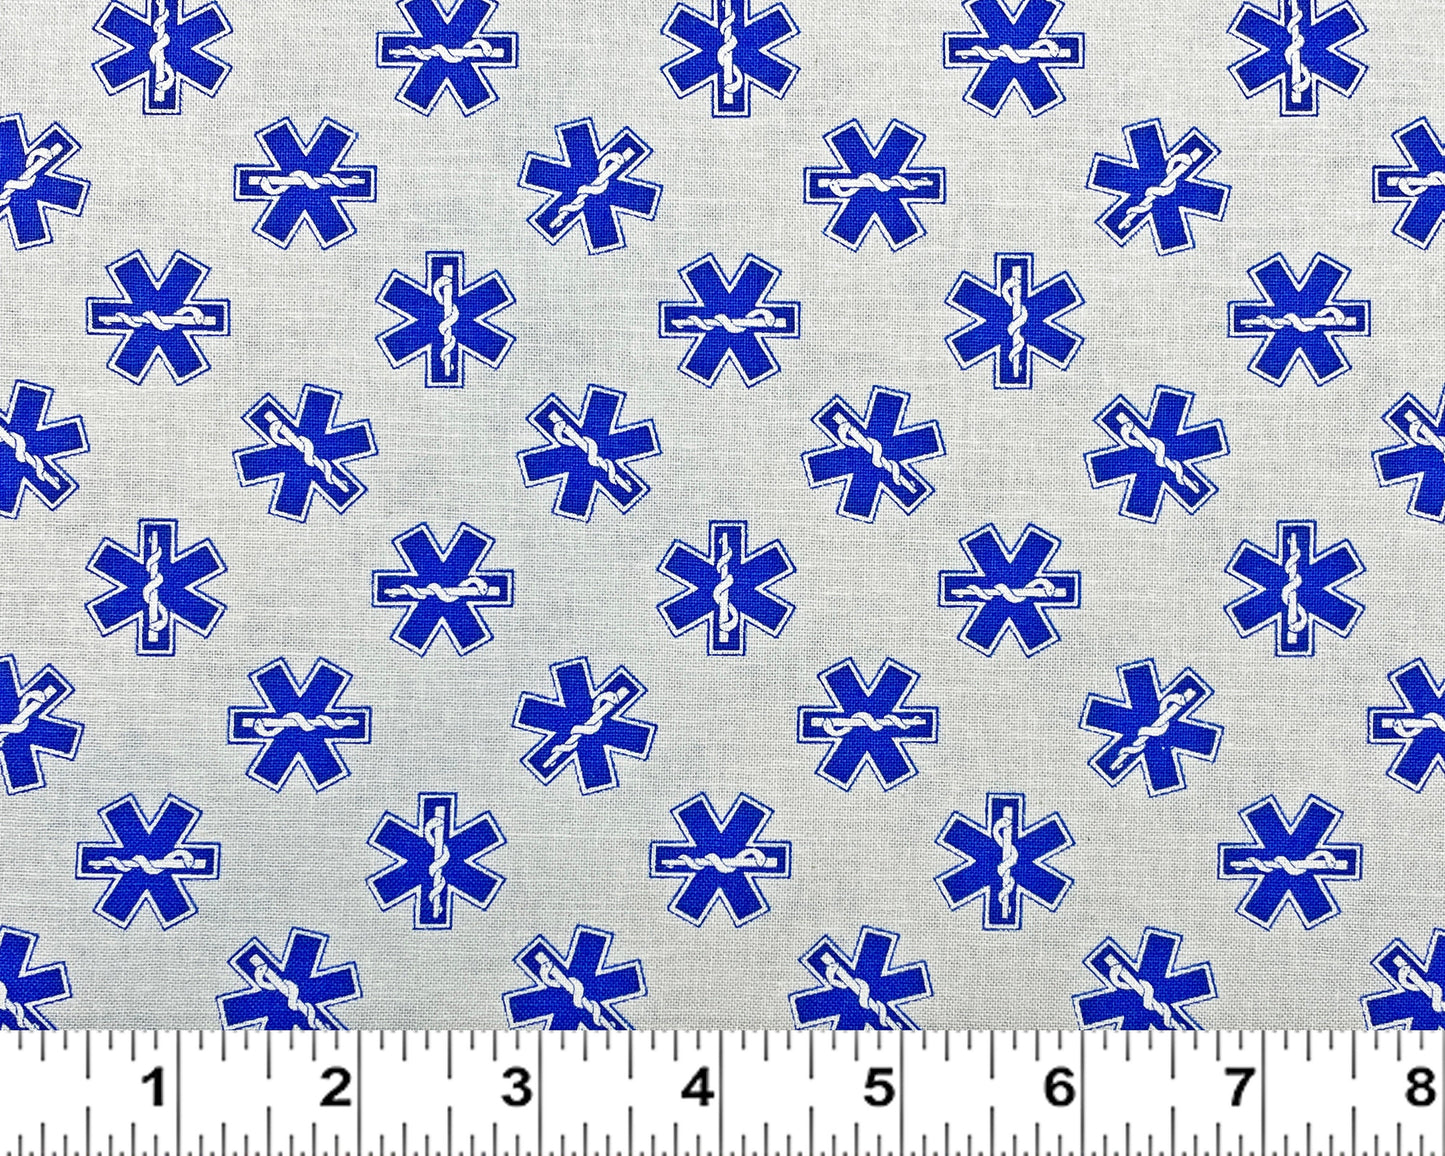 EMT Star Fabric - To The Rescue - Robert Giordano - Henry Glass - 100% Cotton- First Responder Medical Hero Quilting Cotton - Ships NEXT DAY